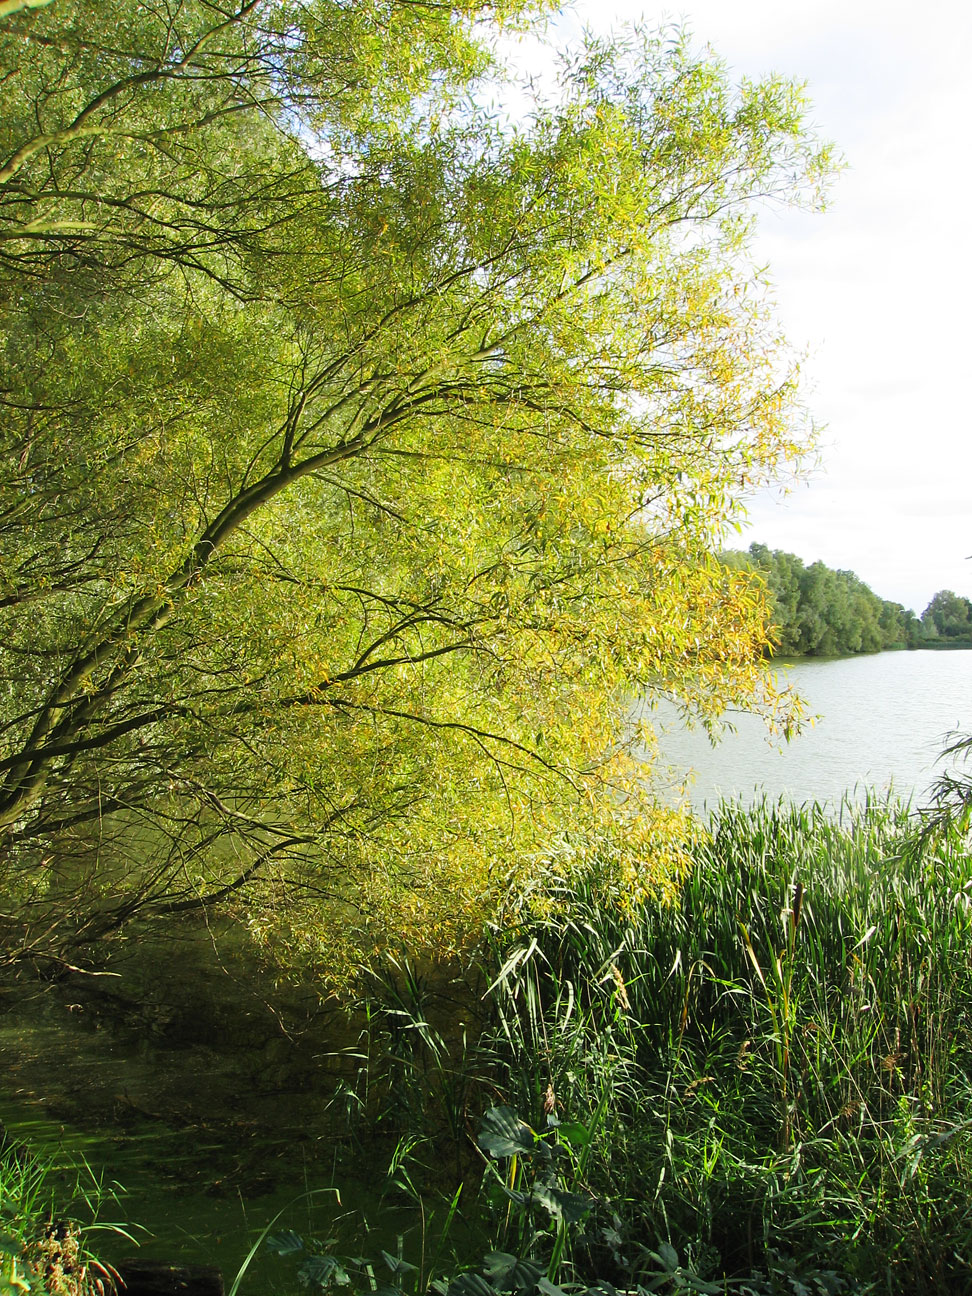 Paxton Pits Nature Reserve